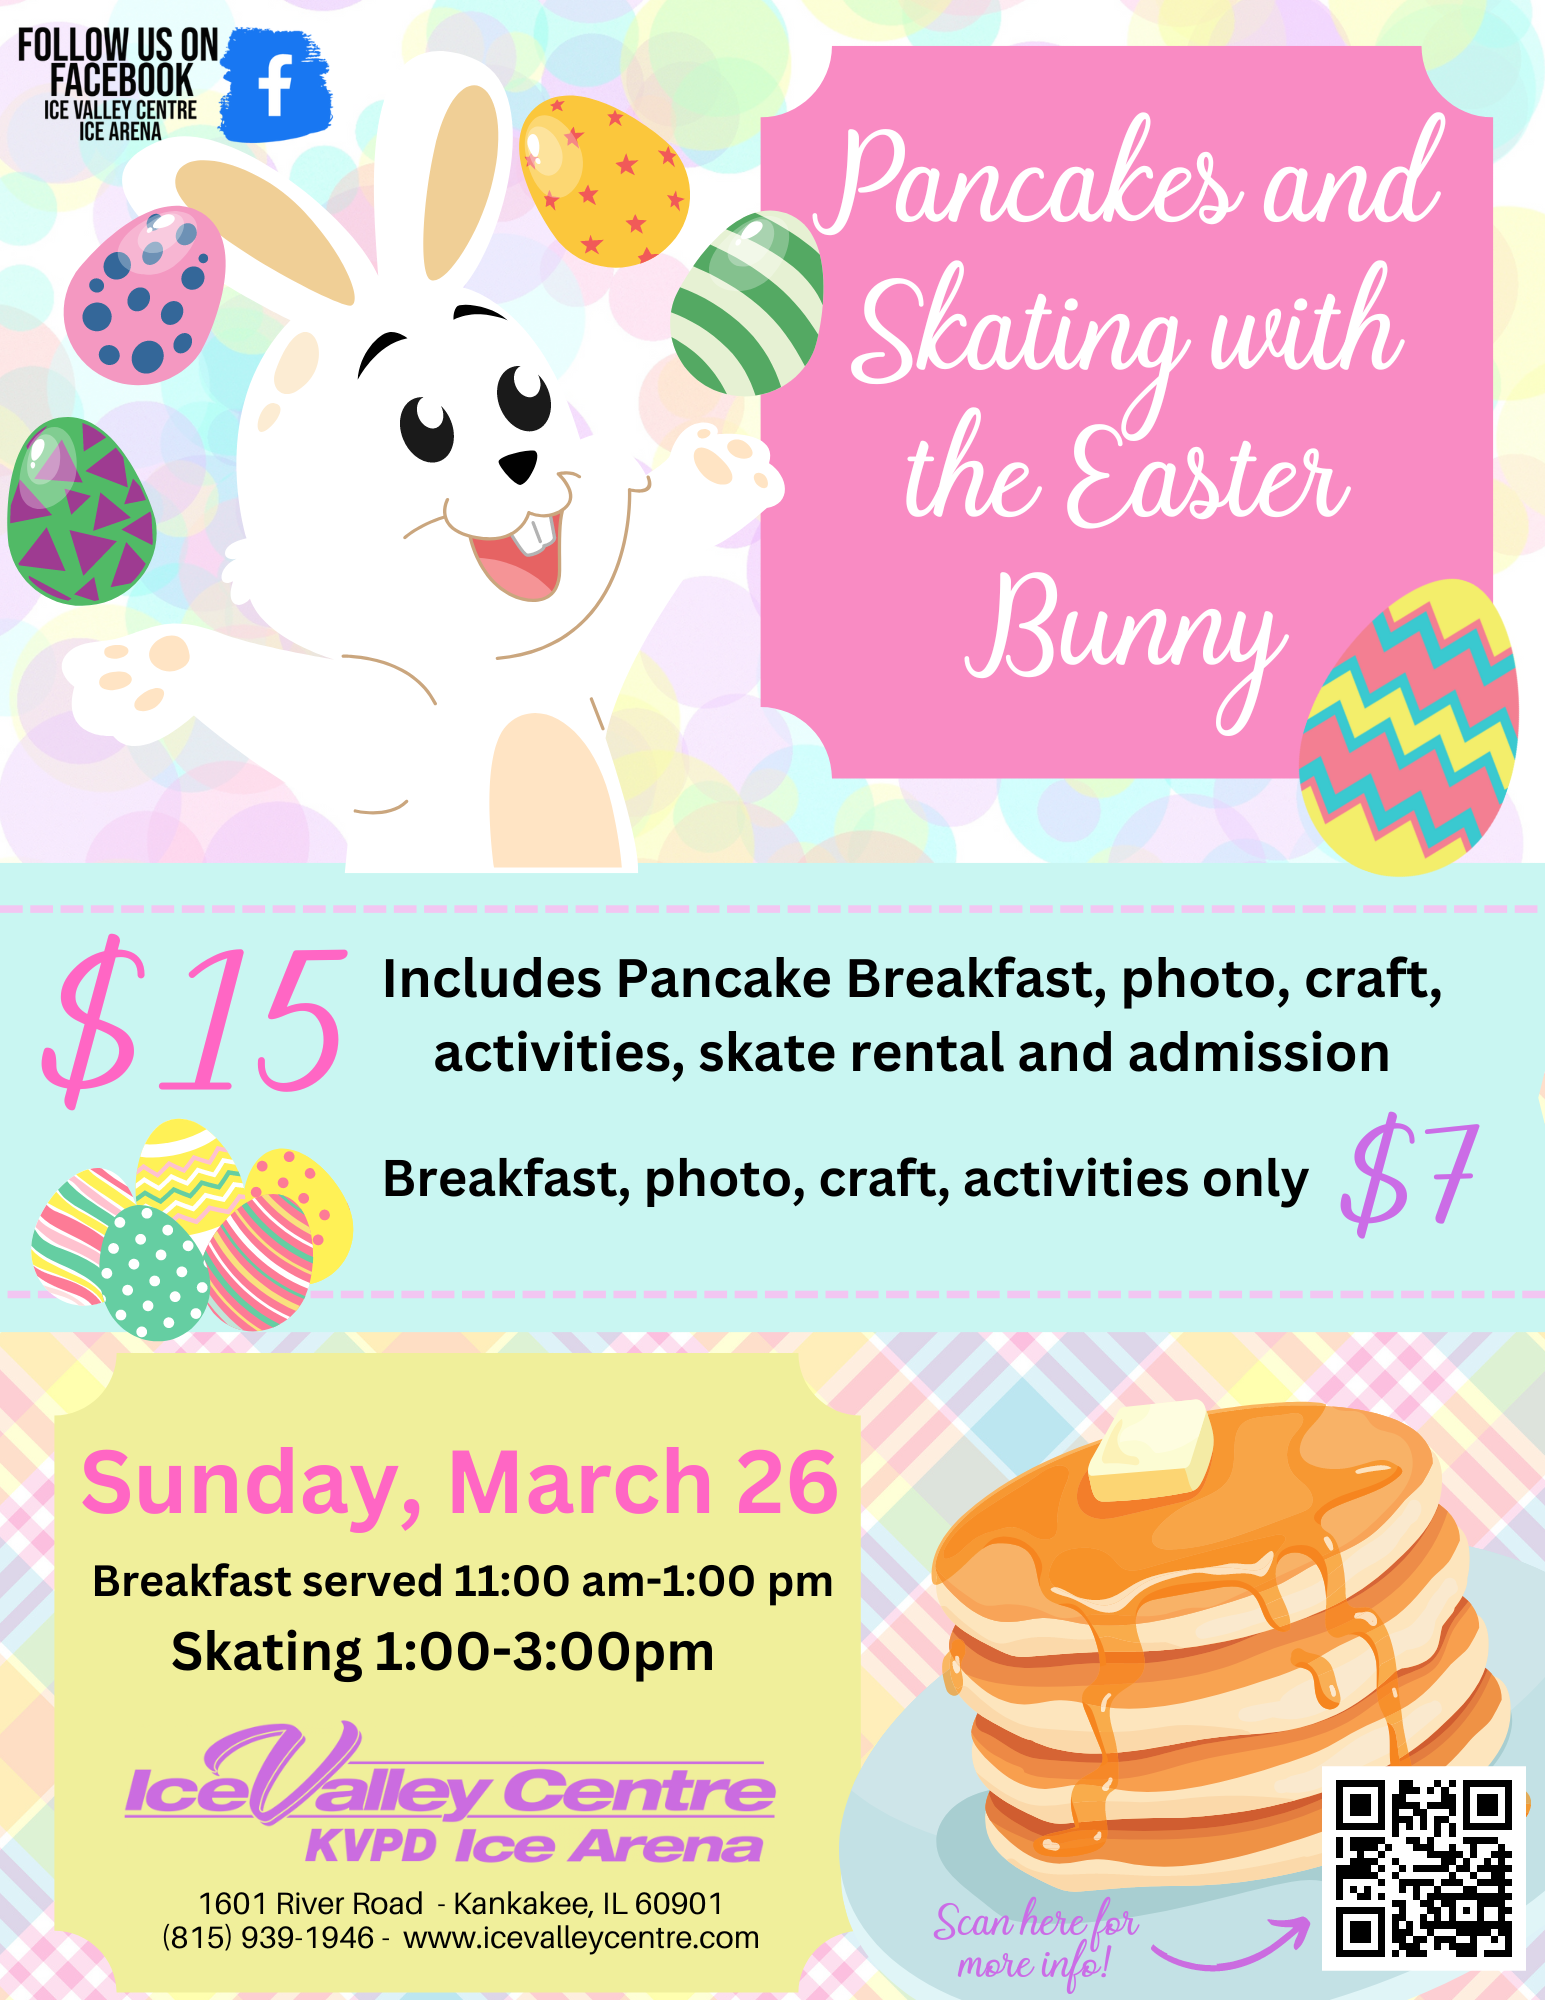 Pancakes & Skating with the Easter Bunny